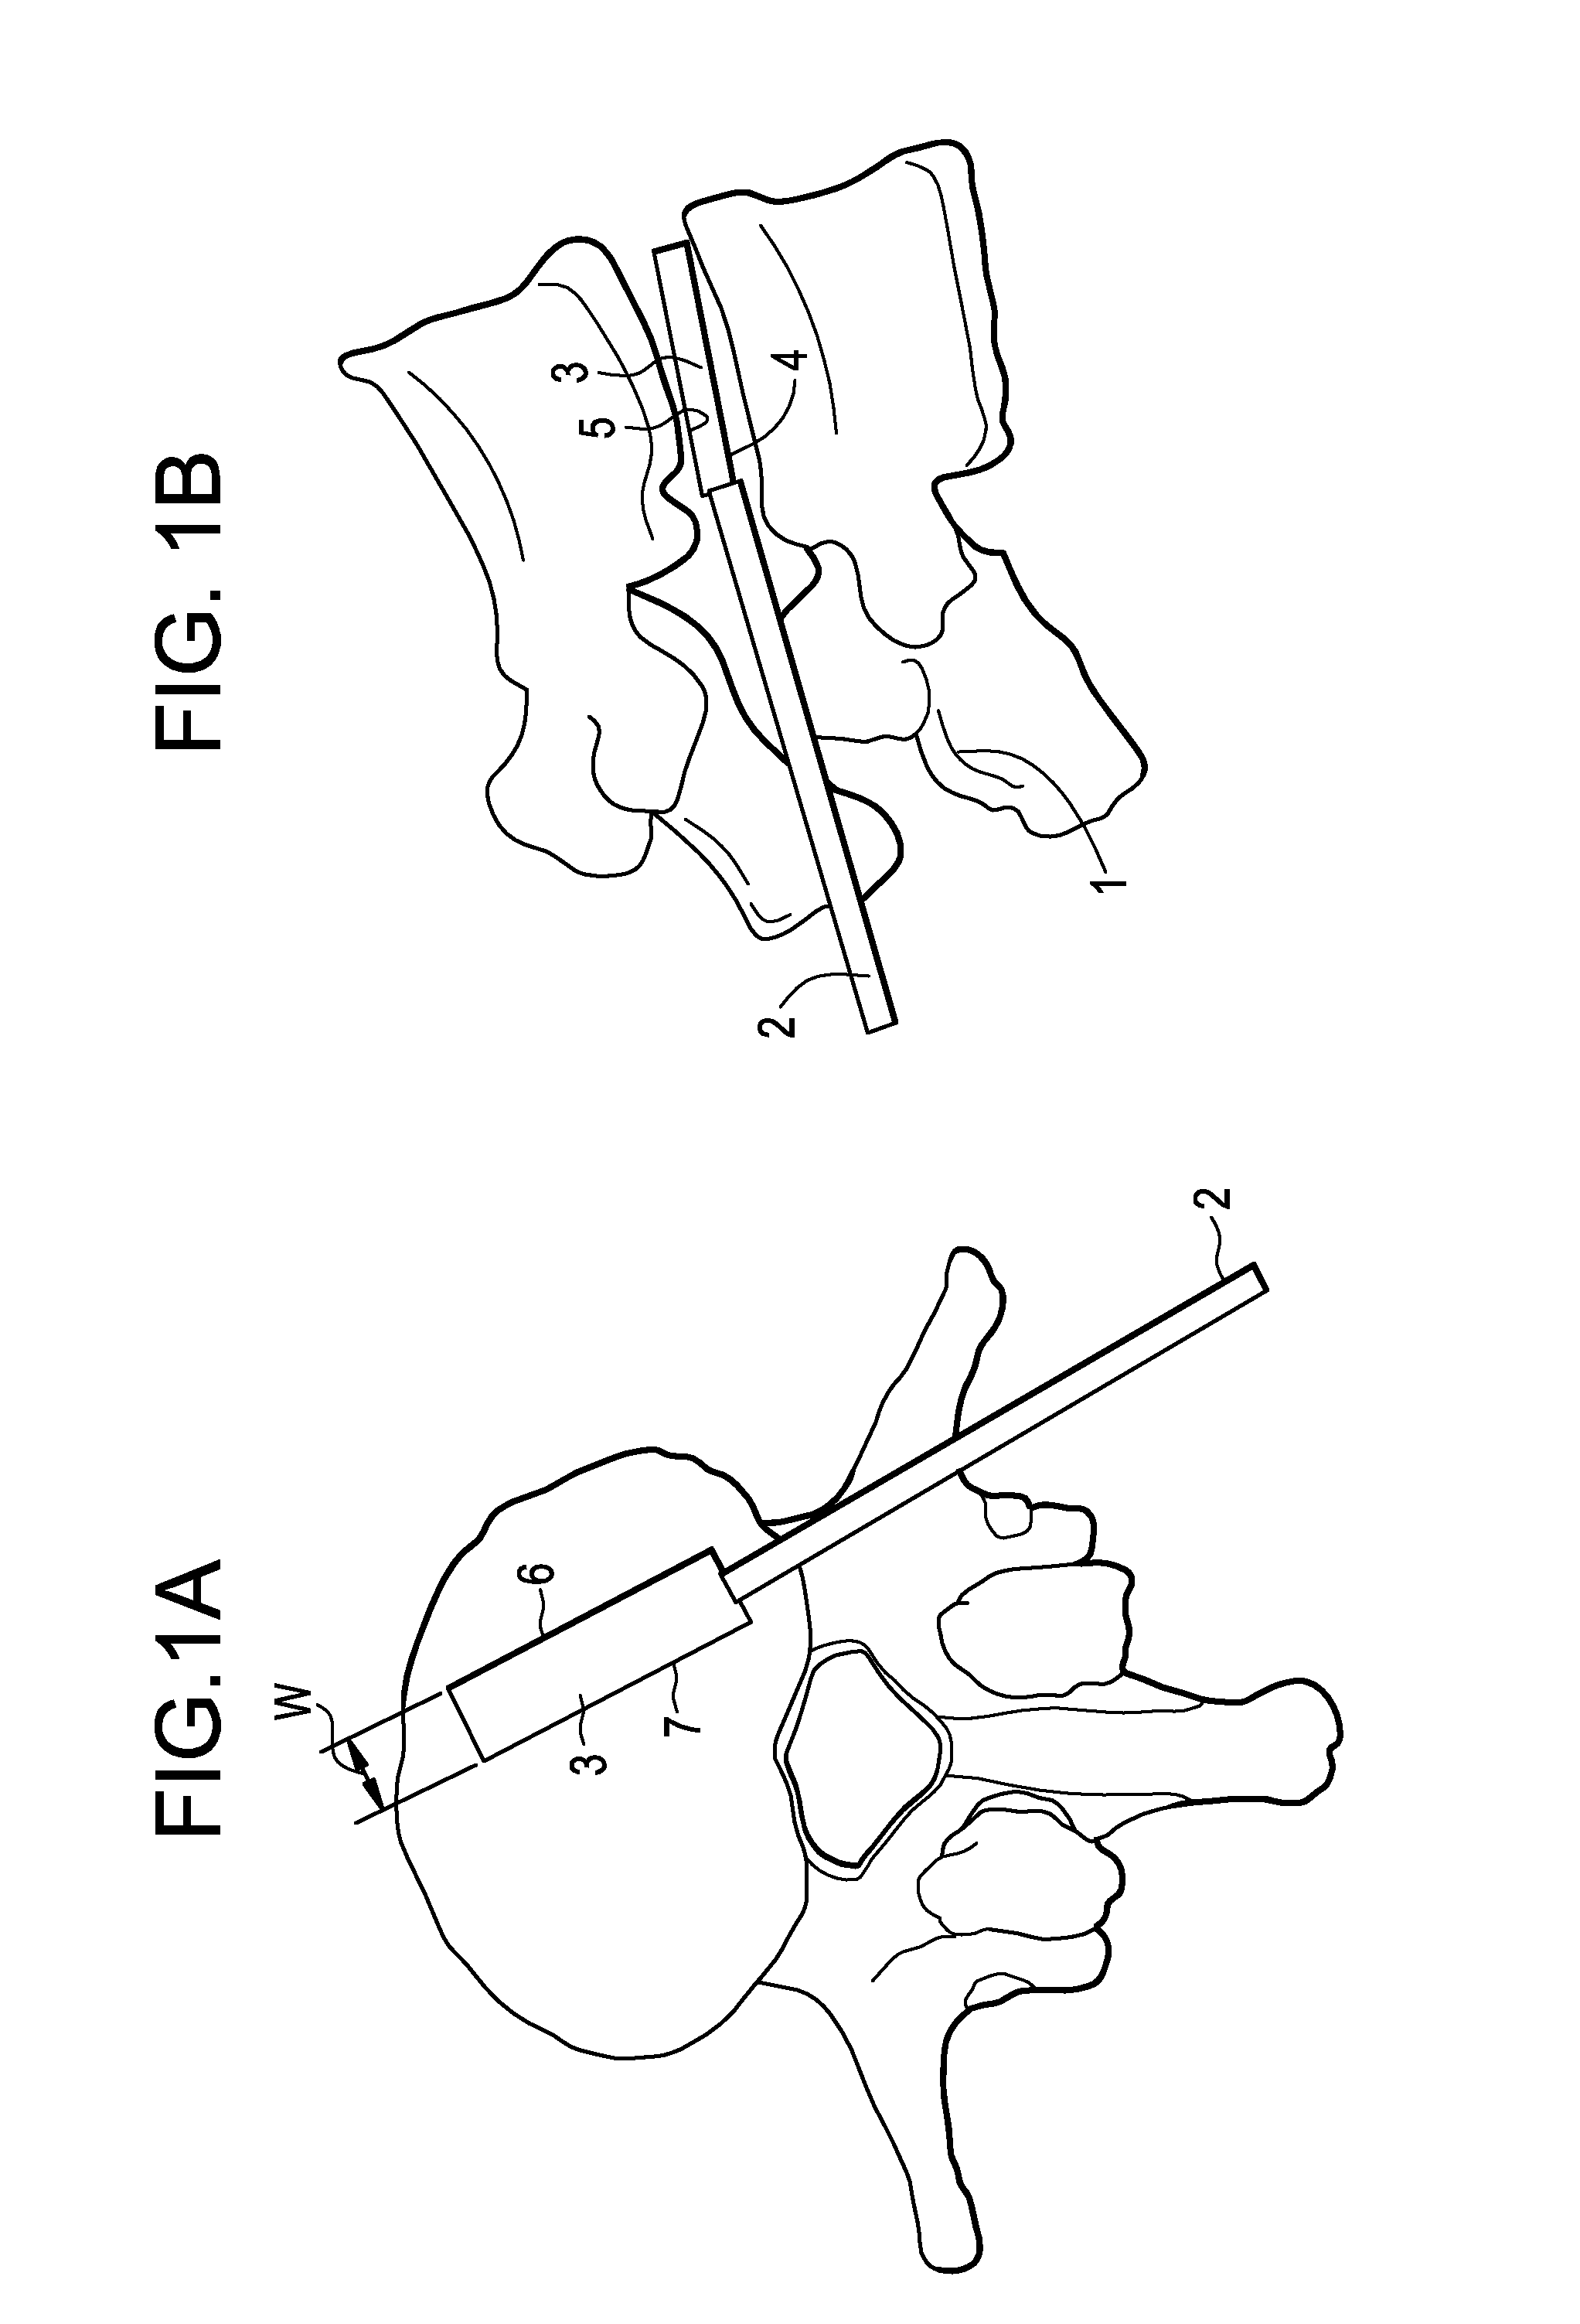 Balloon With Shape Control For Spinal Procedures